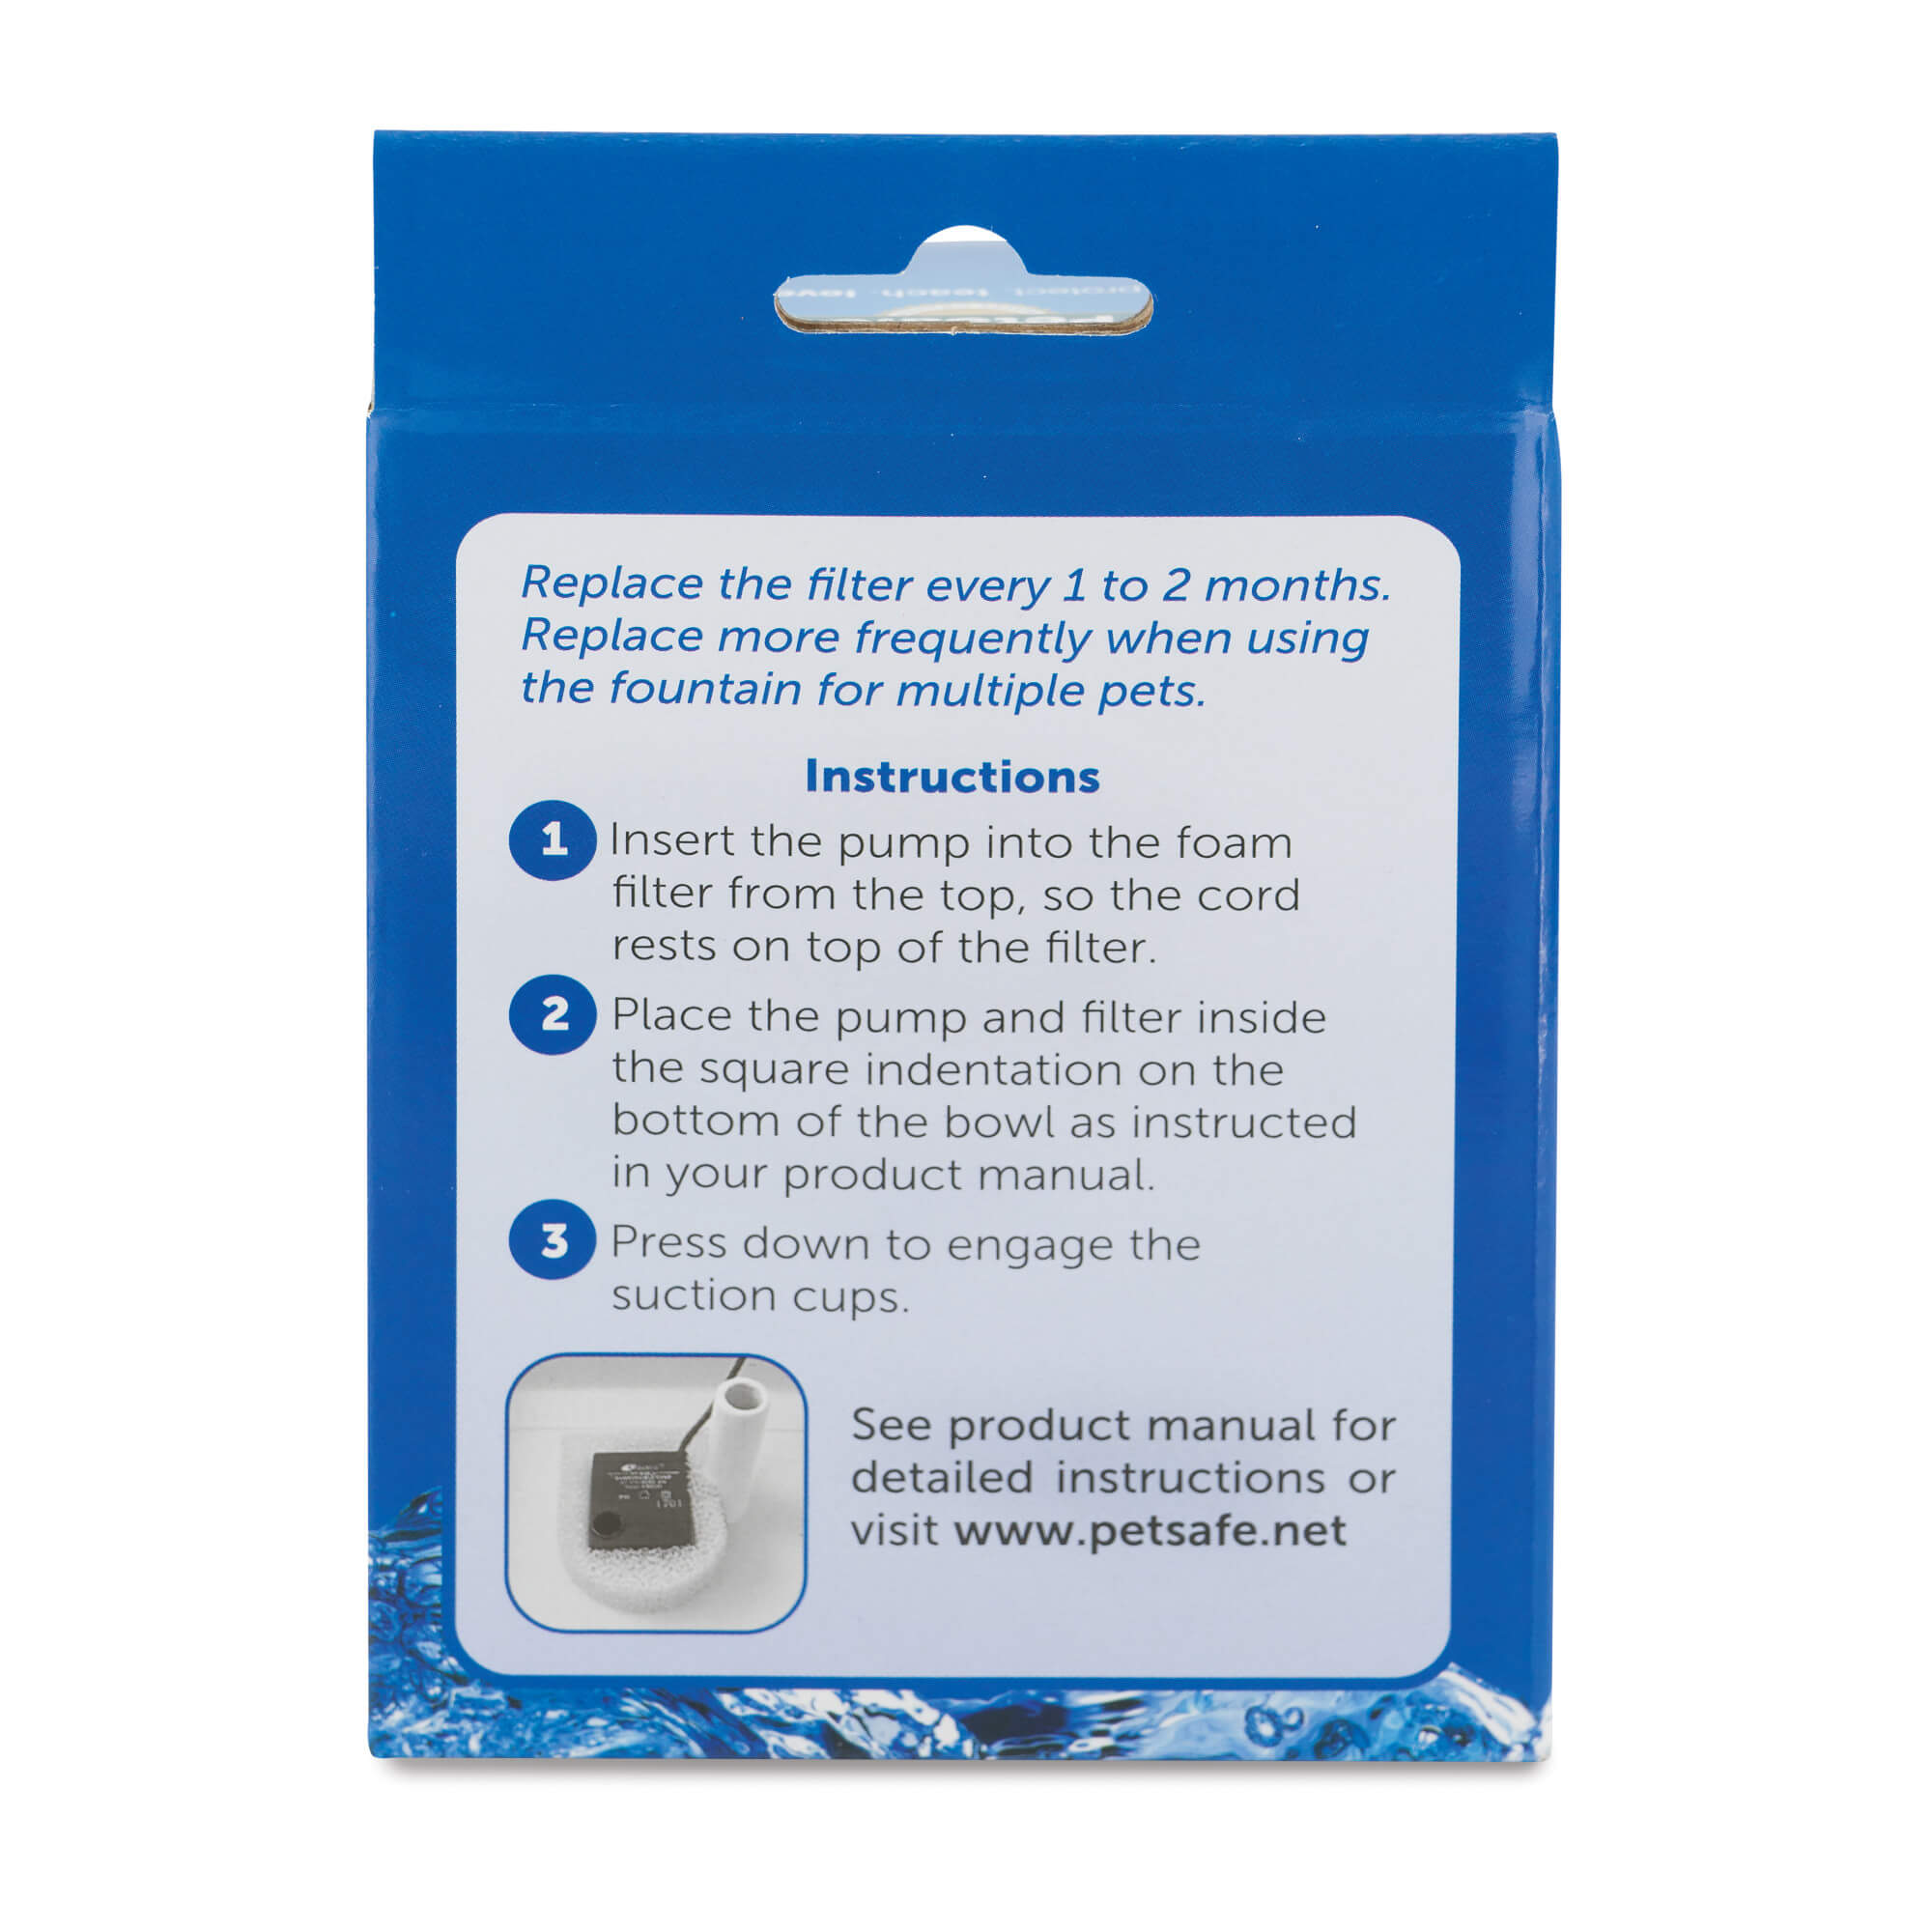 Drinkwell foam filter for ceramic fountains - back of packaging